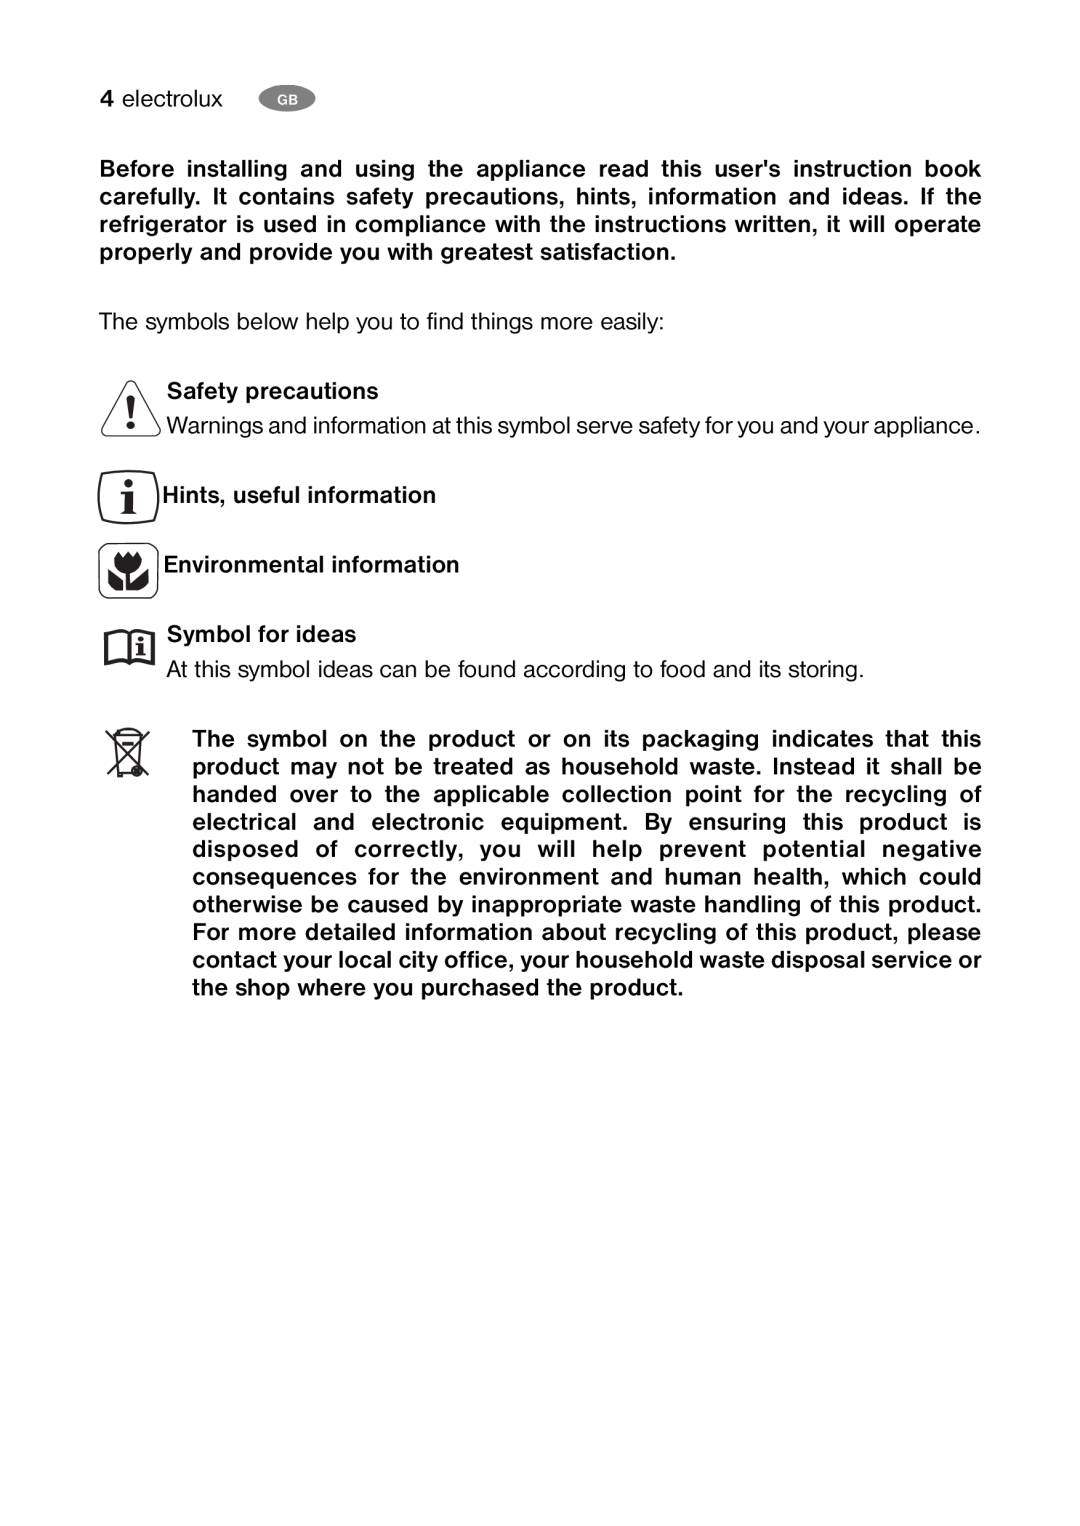 Electrolux ENB34000W Safety precautions, Hints, useful information Environmental information Symbol for ideas, electrolux 